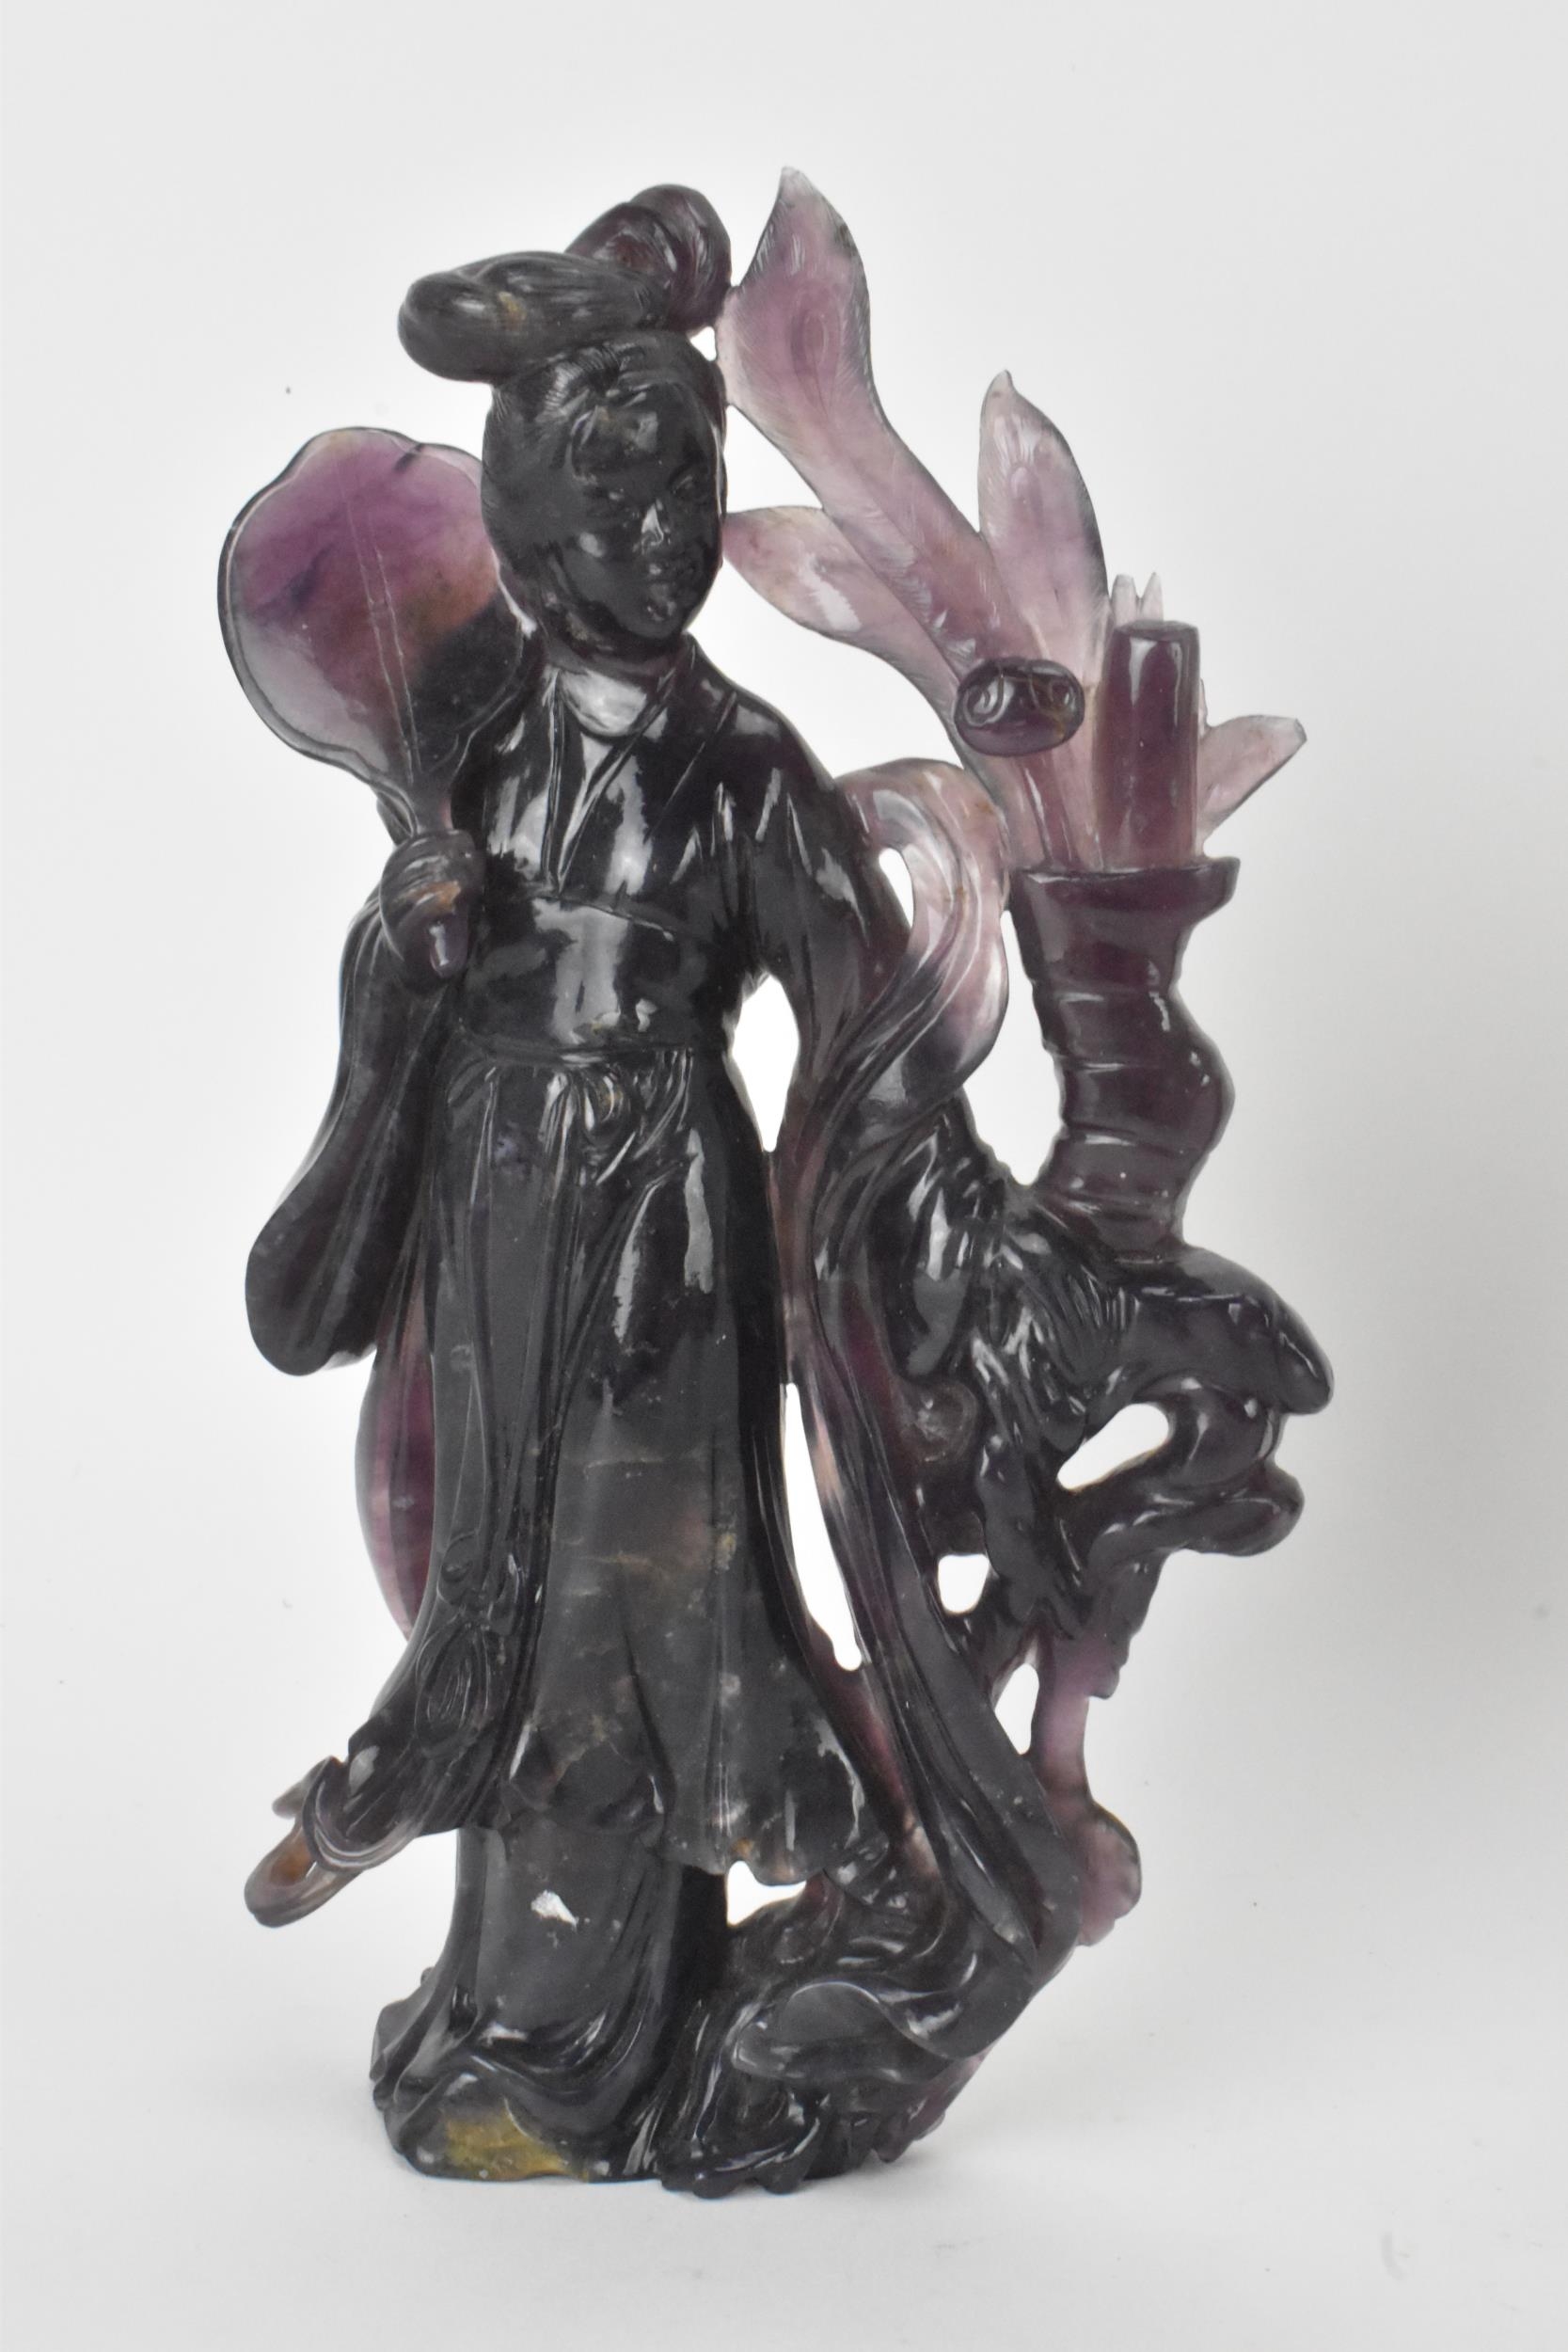 Two Chinese 20th century jadeite carved figures, the green example modeled holding a fan and flowers - Image 2 of 7